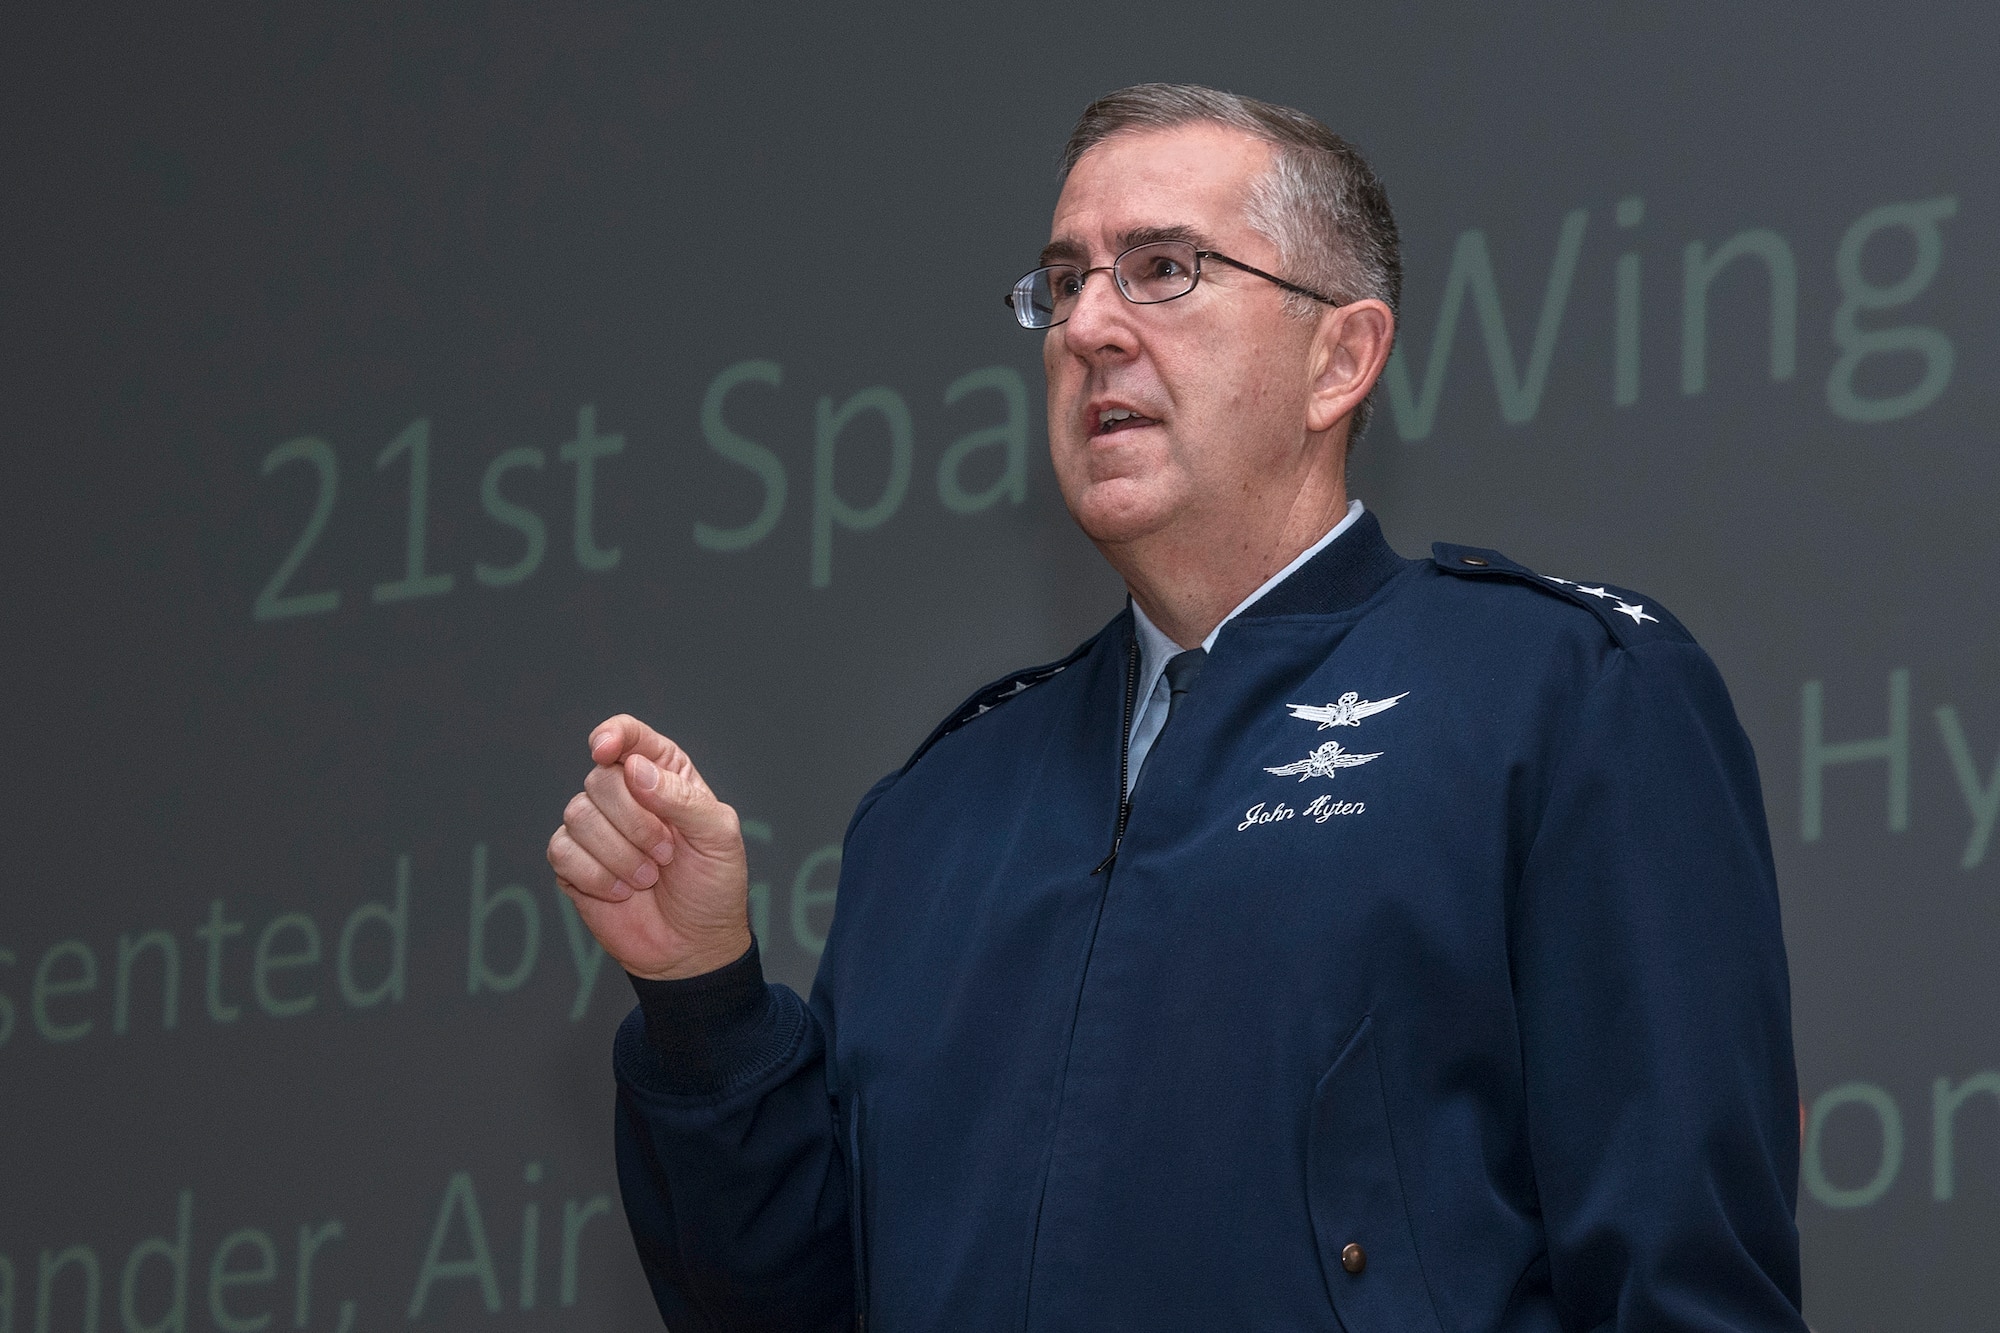 PETERSON AIR FORCE BASE, Colo. – Gen. John E. Hyten, Air Force Space Command commander discusses the history of the General Thomas S. Moorman Jr. Trophy with 21st Space Wing personnel after presenting the award to the 21st Space Wing on April 21, 2016 during the 21st Space Wing commander’s call. The Moorman Award recognizes the best overall wing in Air Force Space Command. (U.S. Air Force Photo by Craig Denton)